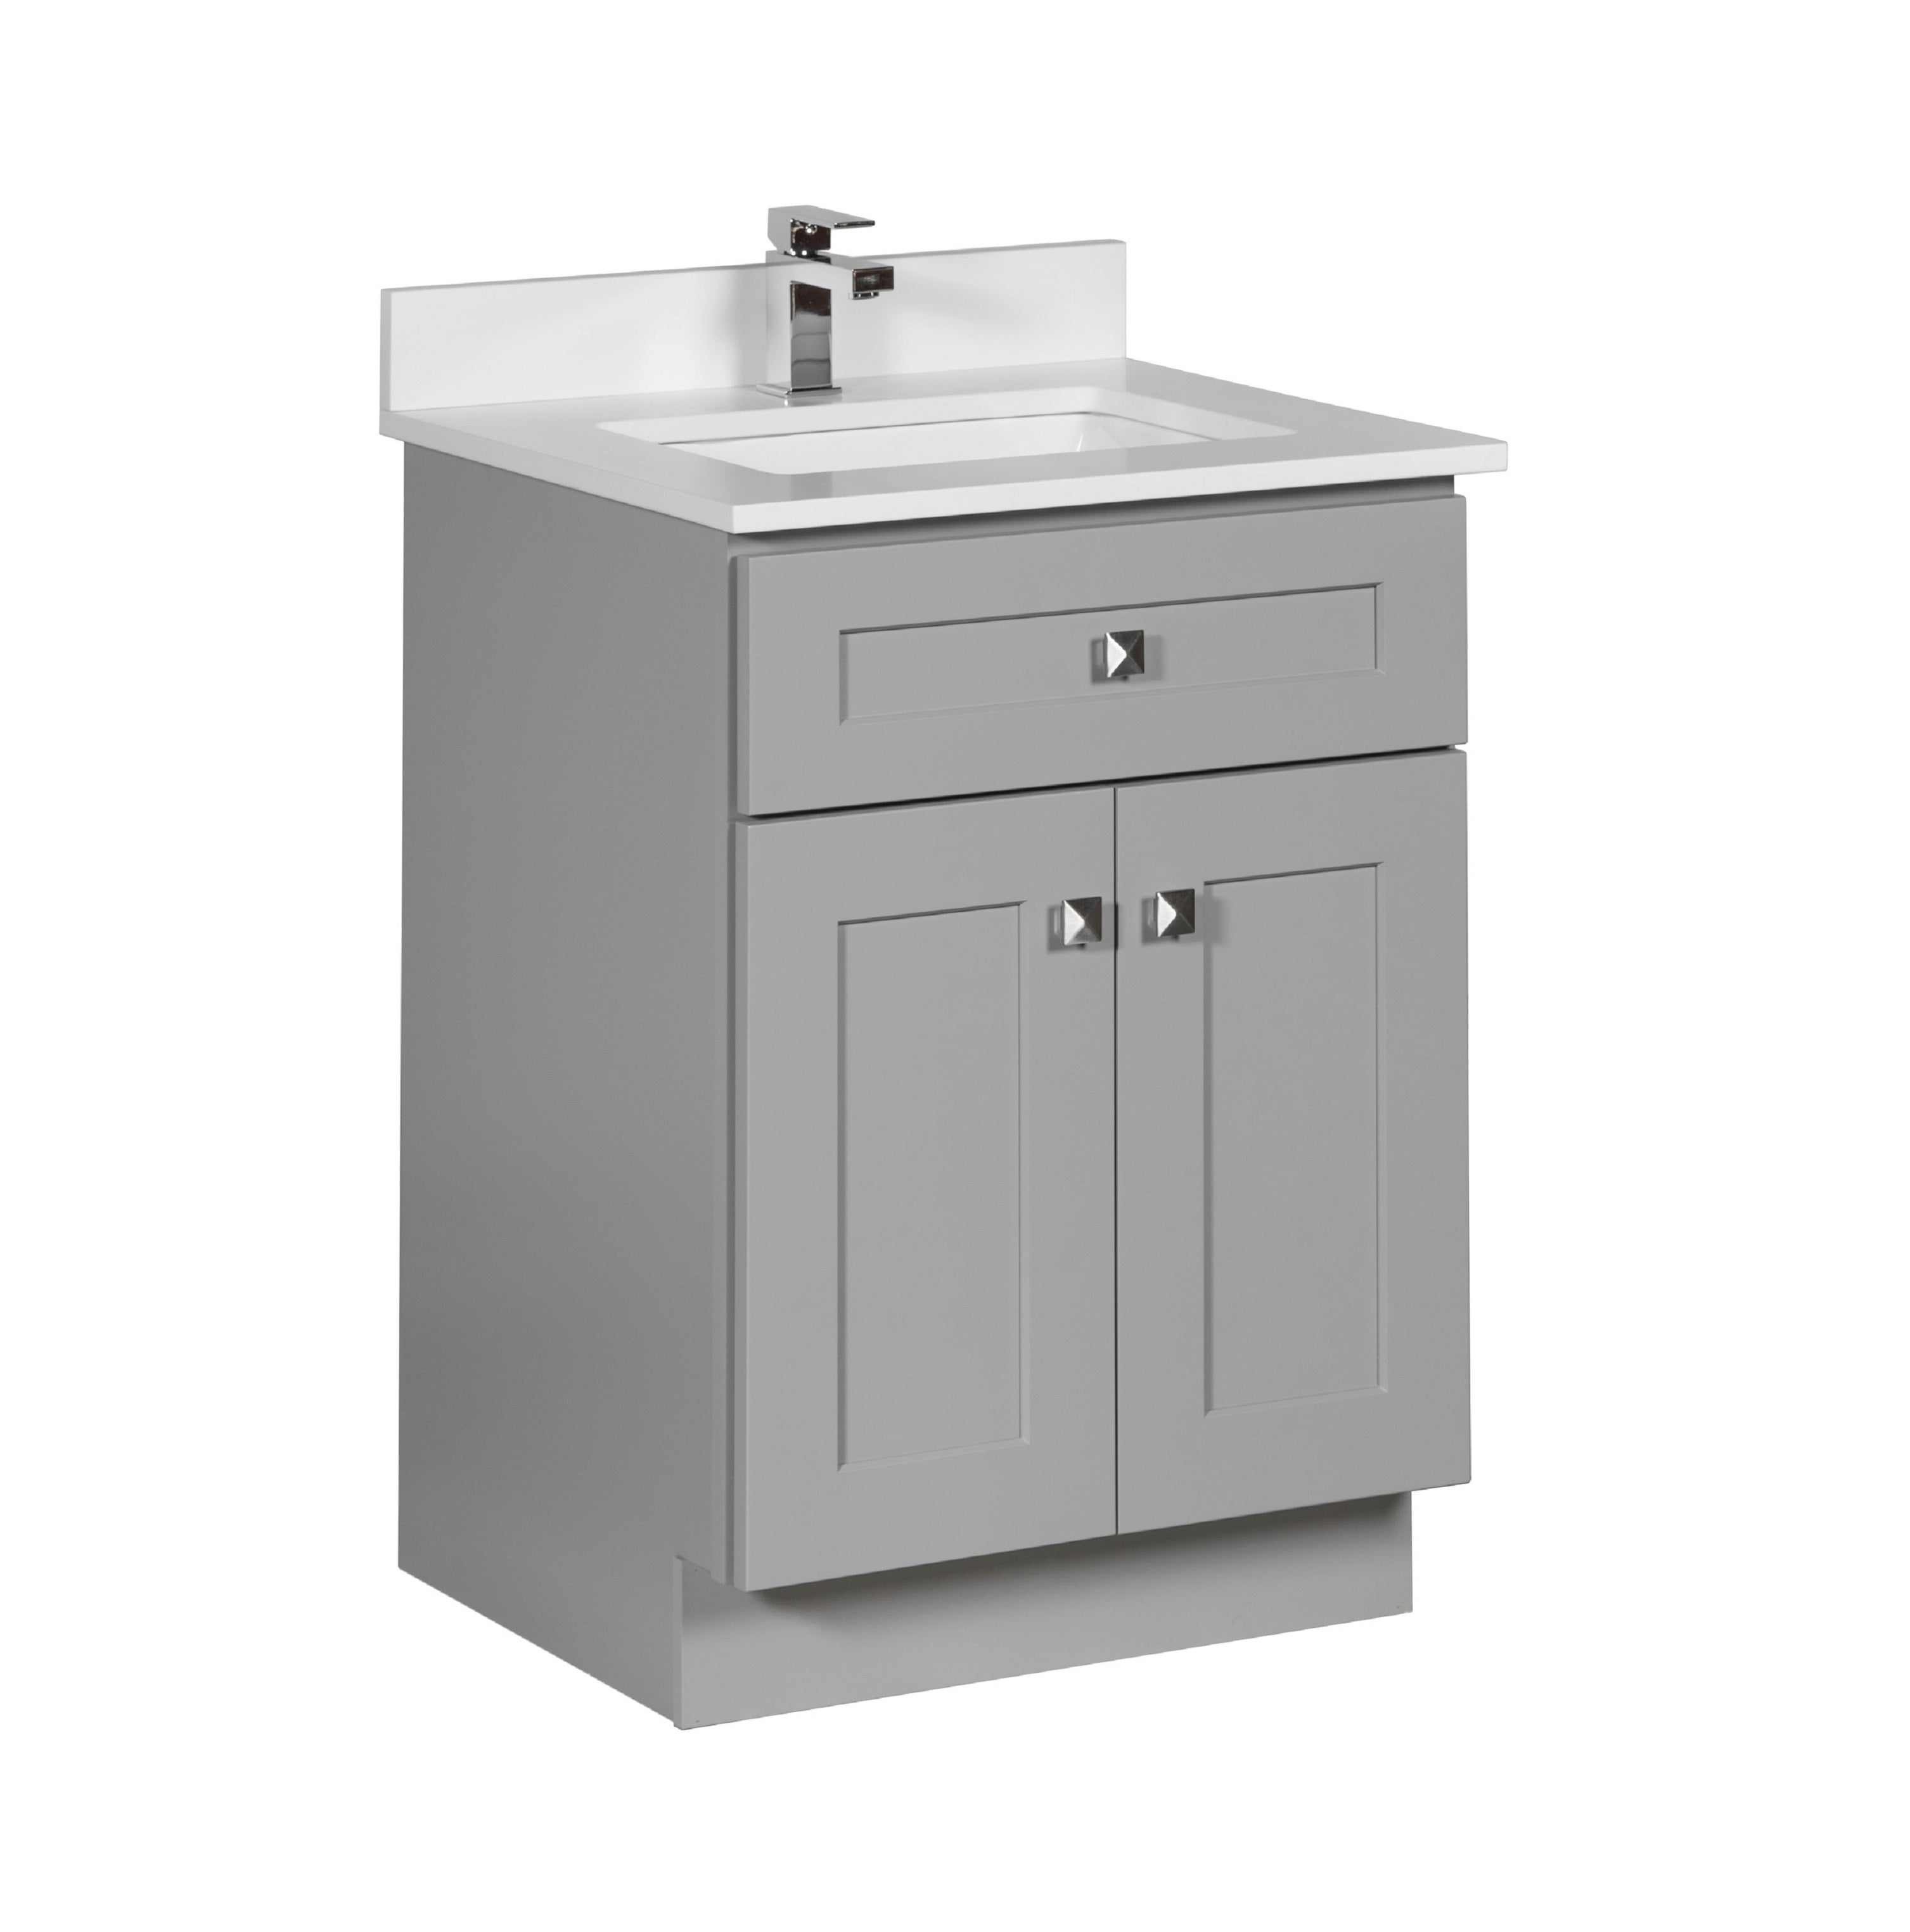 24 inch bathroom vanity without sink